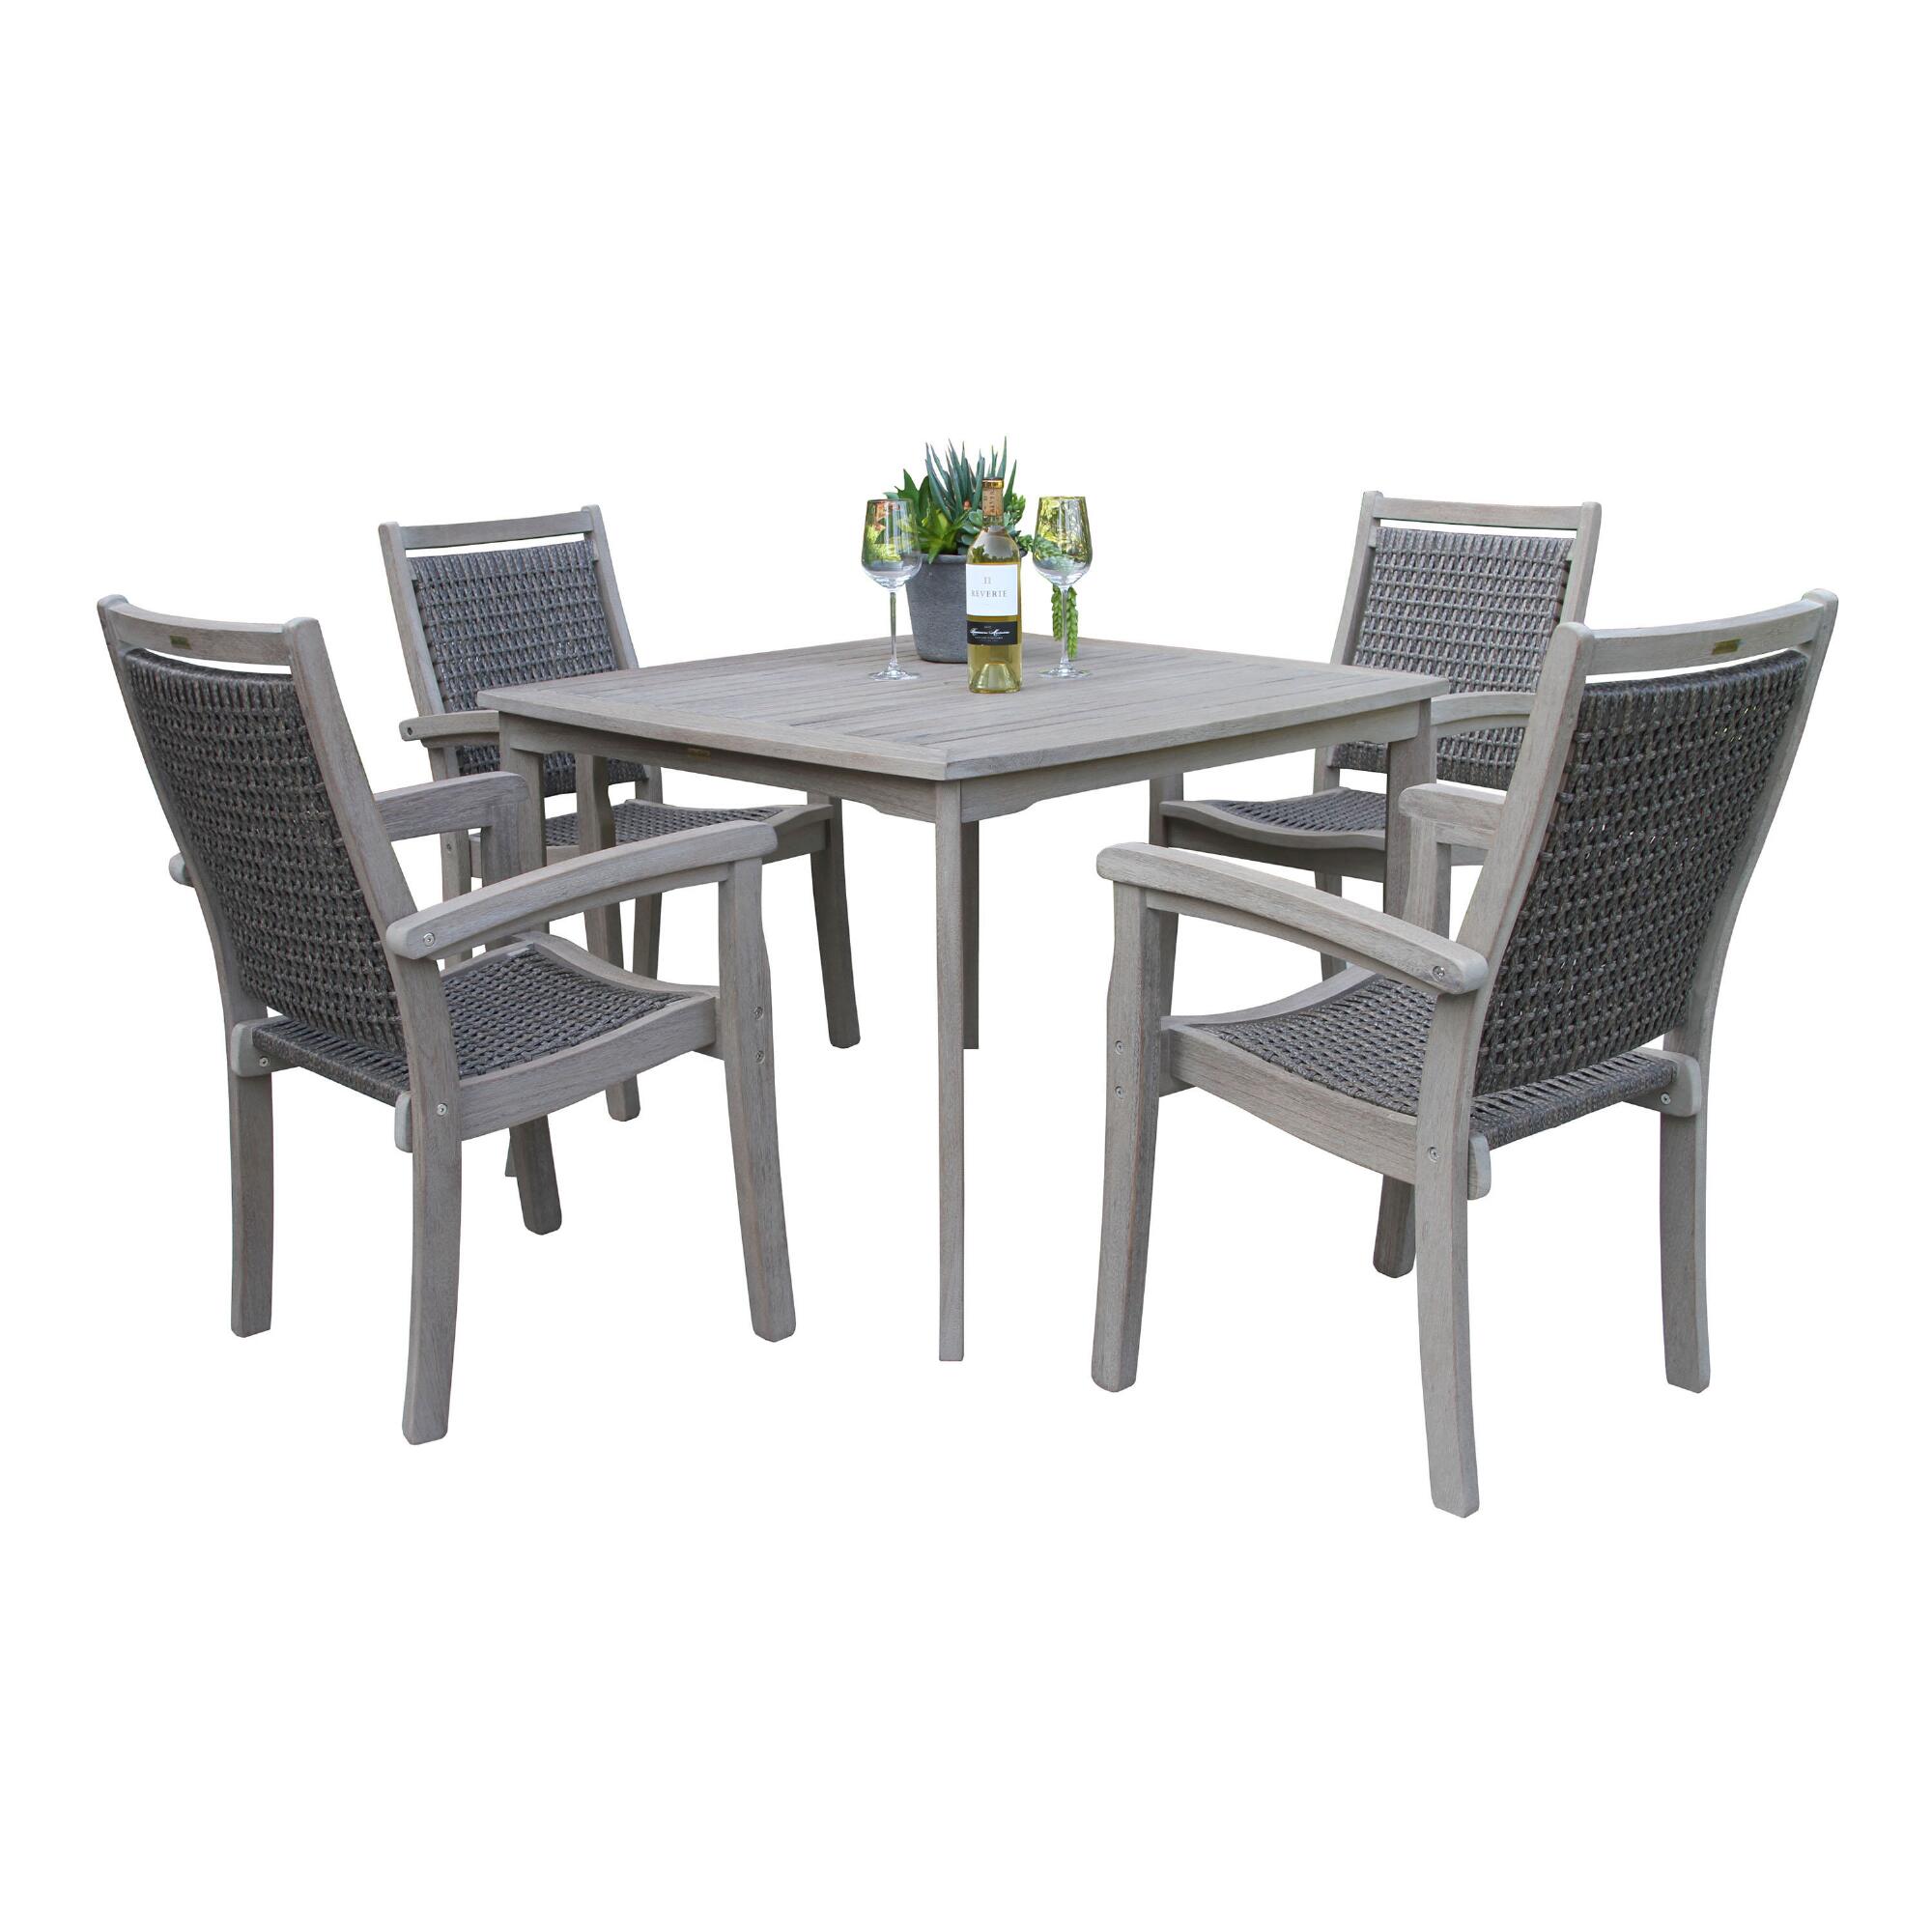 Graywash Eucalyptus Helena Outdoor Patio Dining Collection by World Market